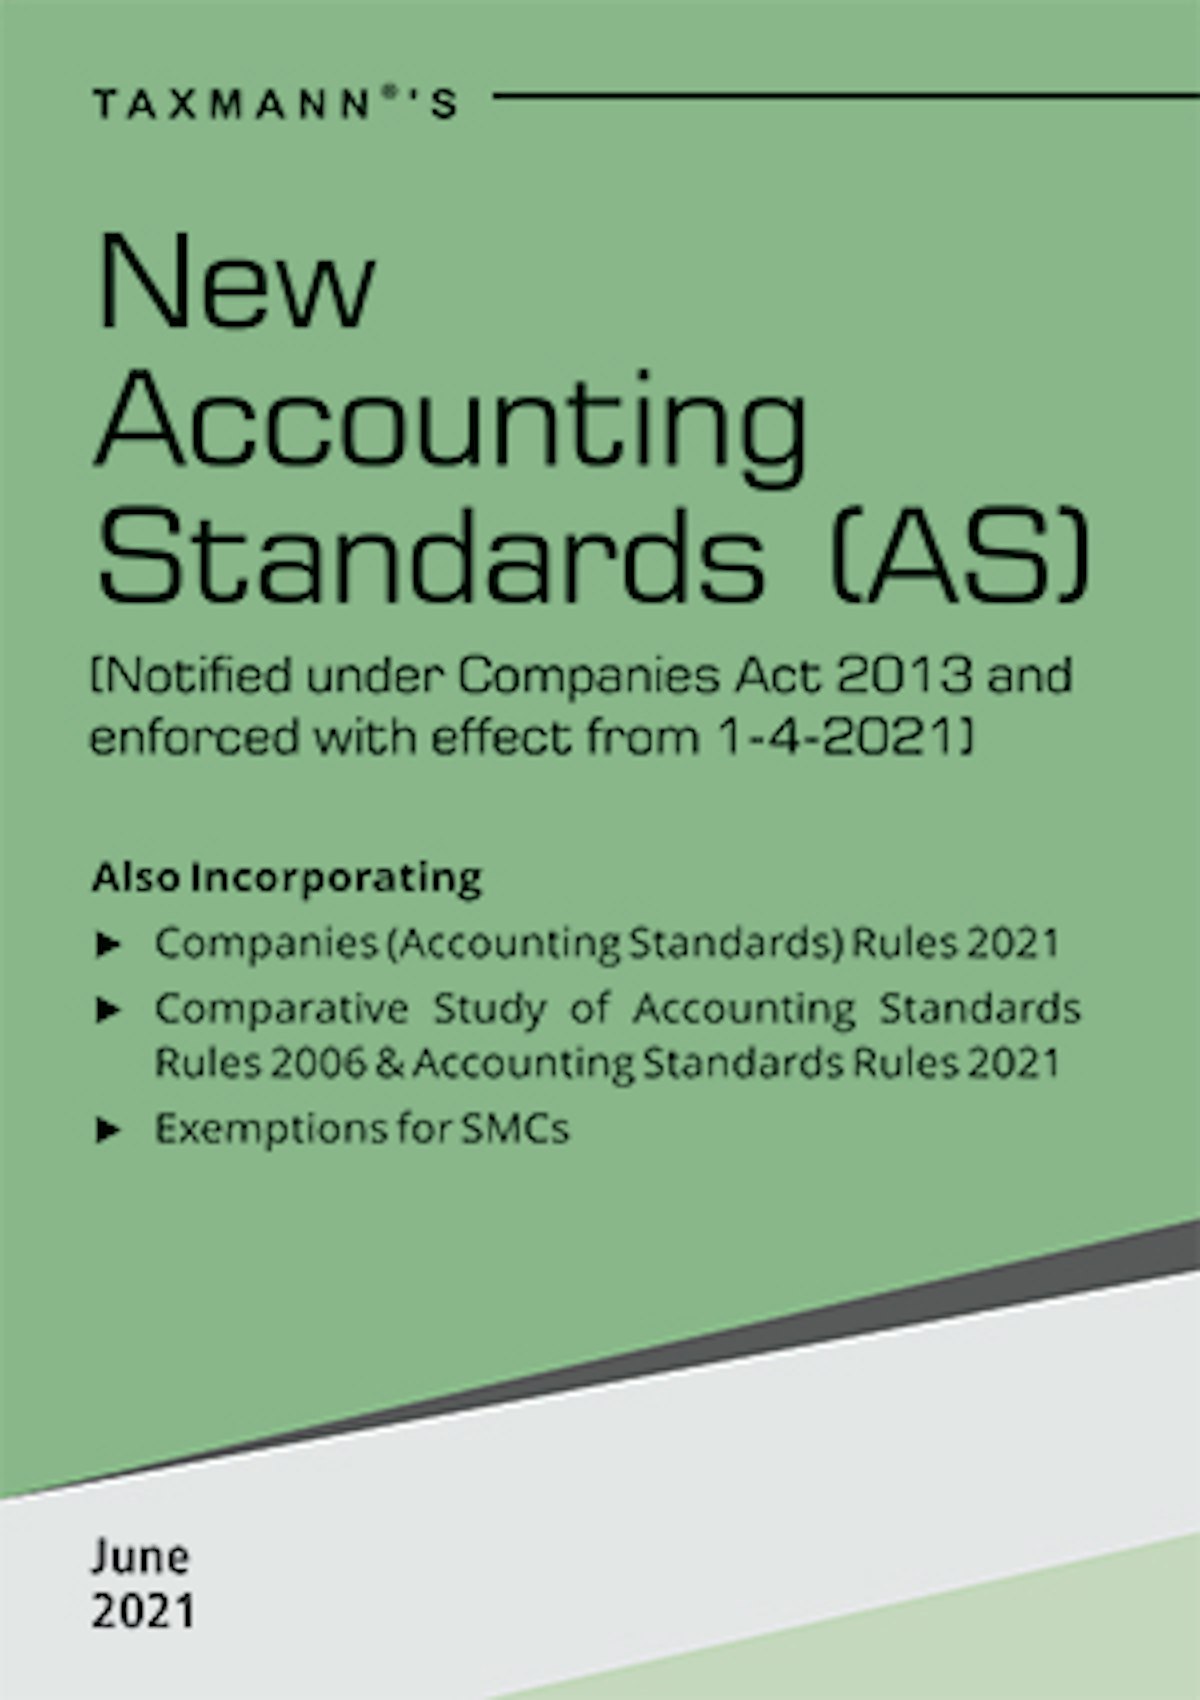 New Accounting Standards issued under Companies (Accounting Standards